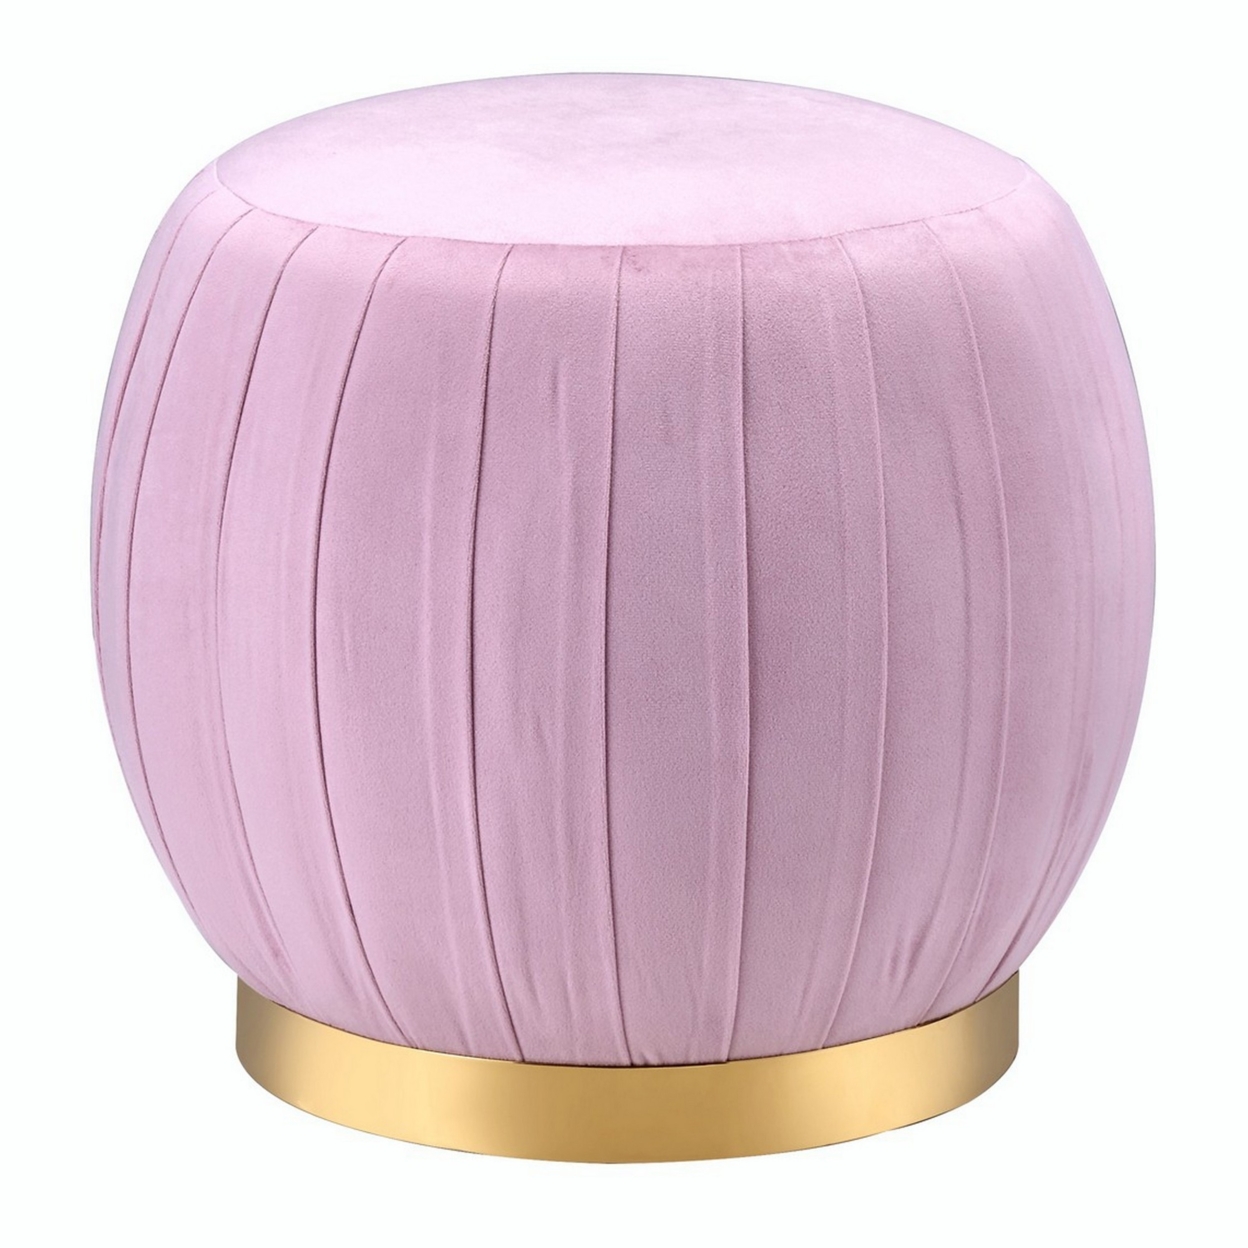 Fabric Upholstered Round Pleated Ottoman With Metal Base, Pink And Gold- Saltoro Sherpi